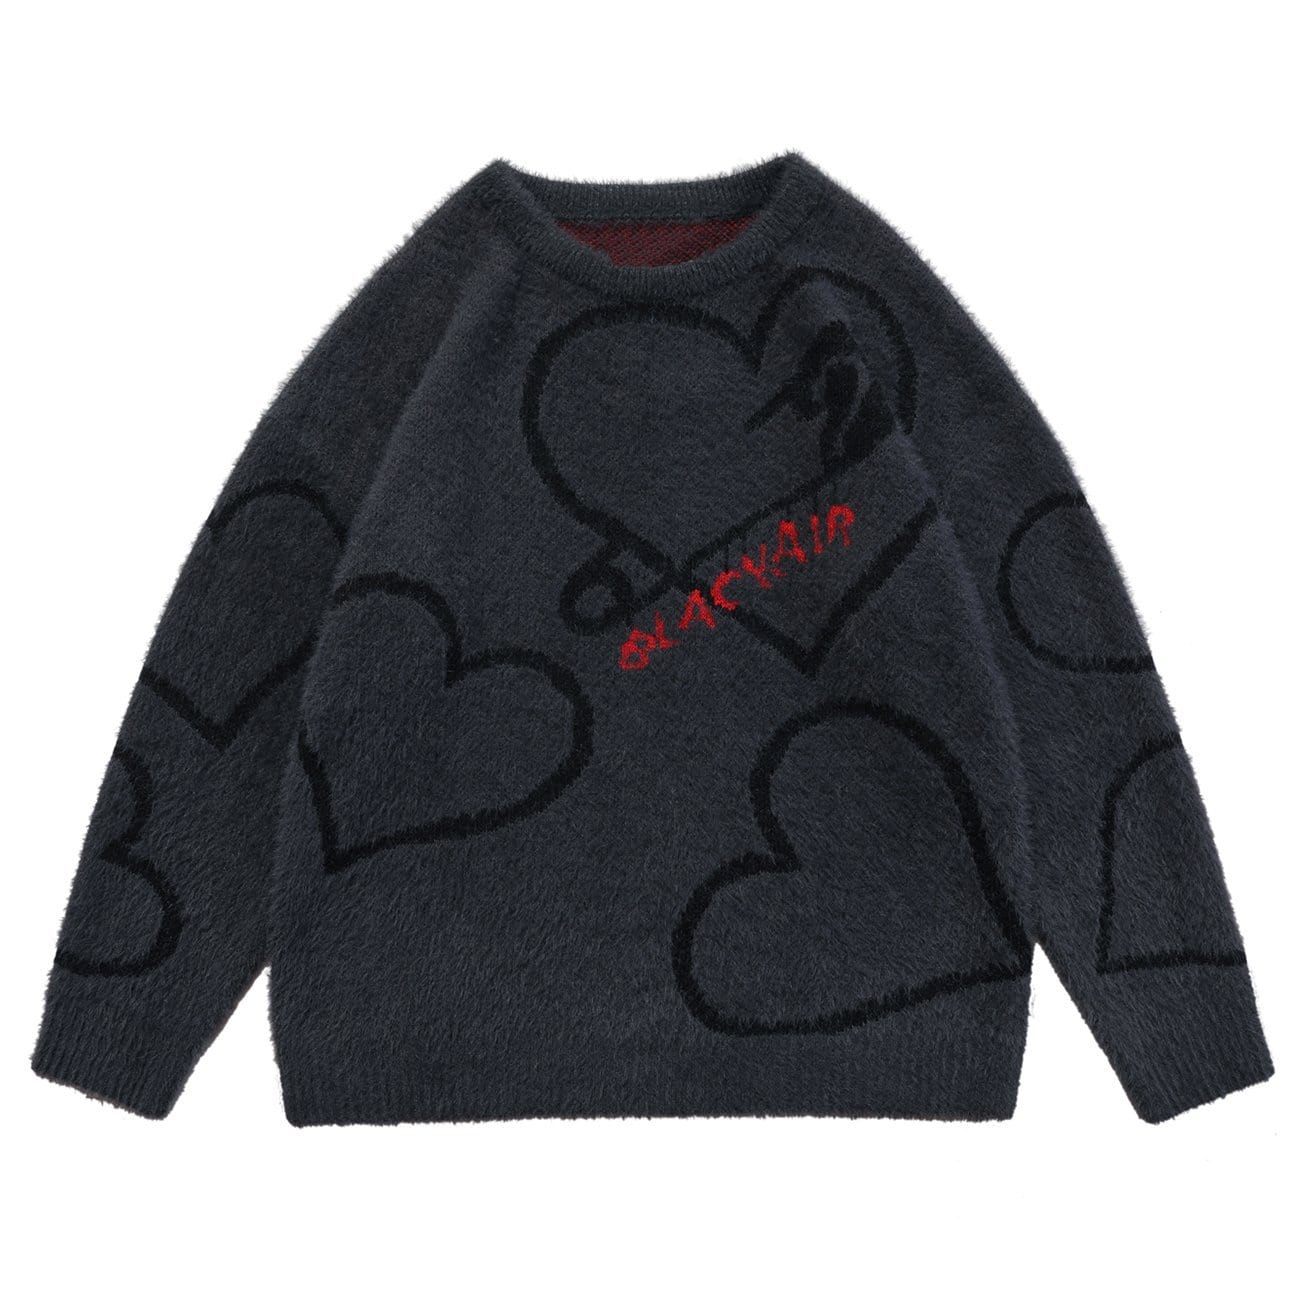 WLS Love Pin Knitted Sweater